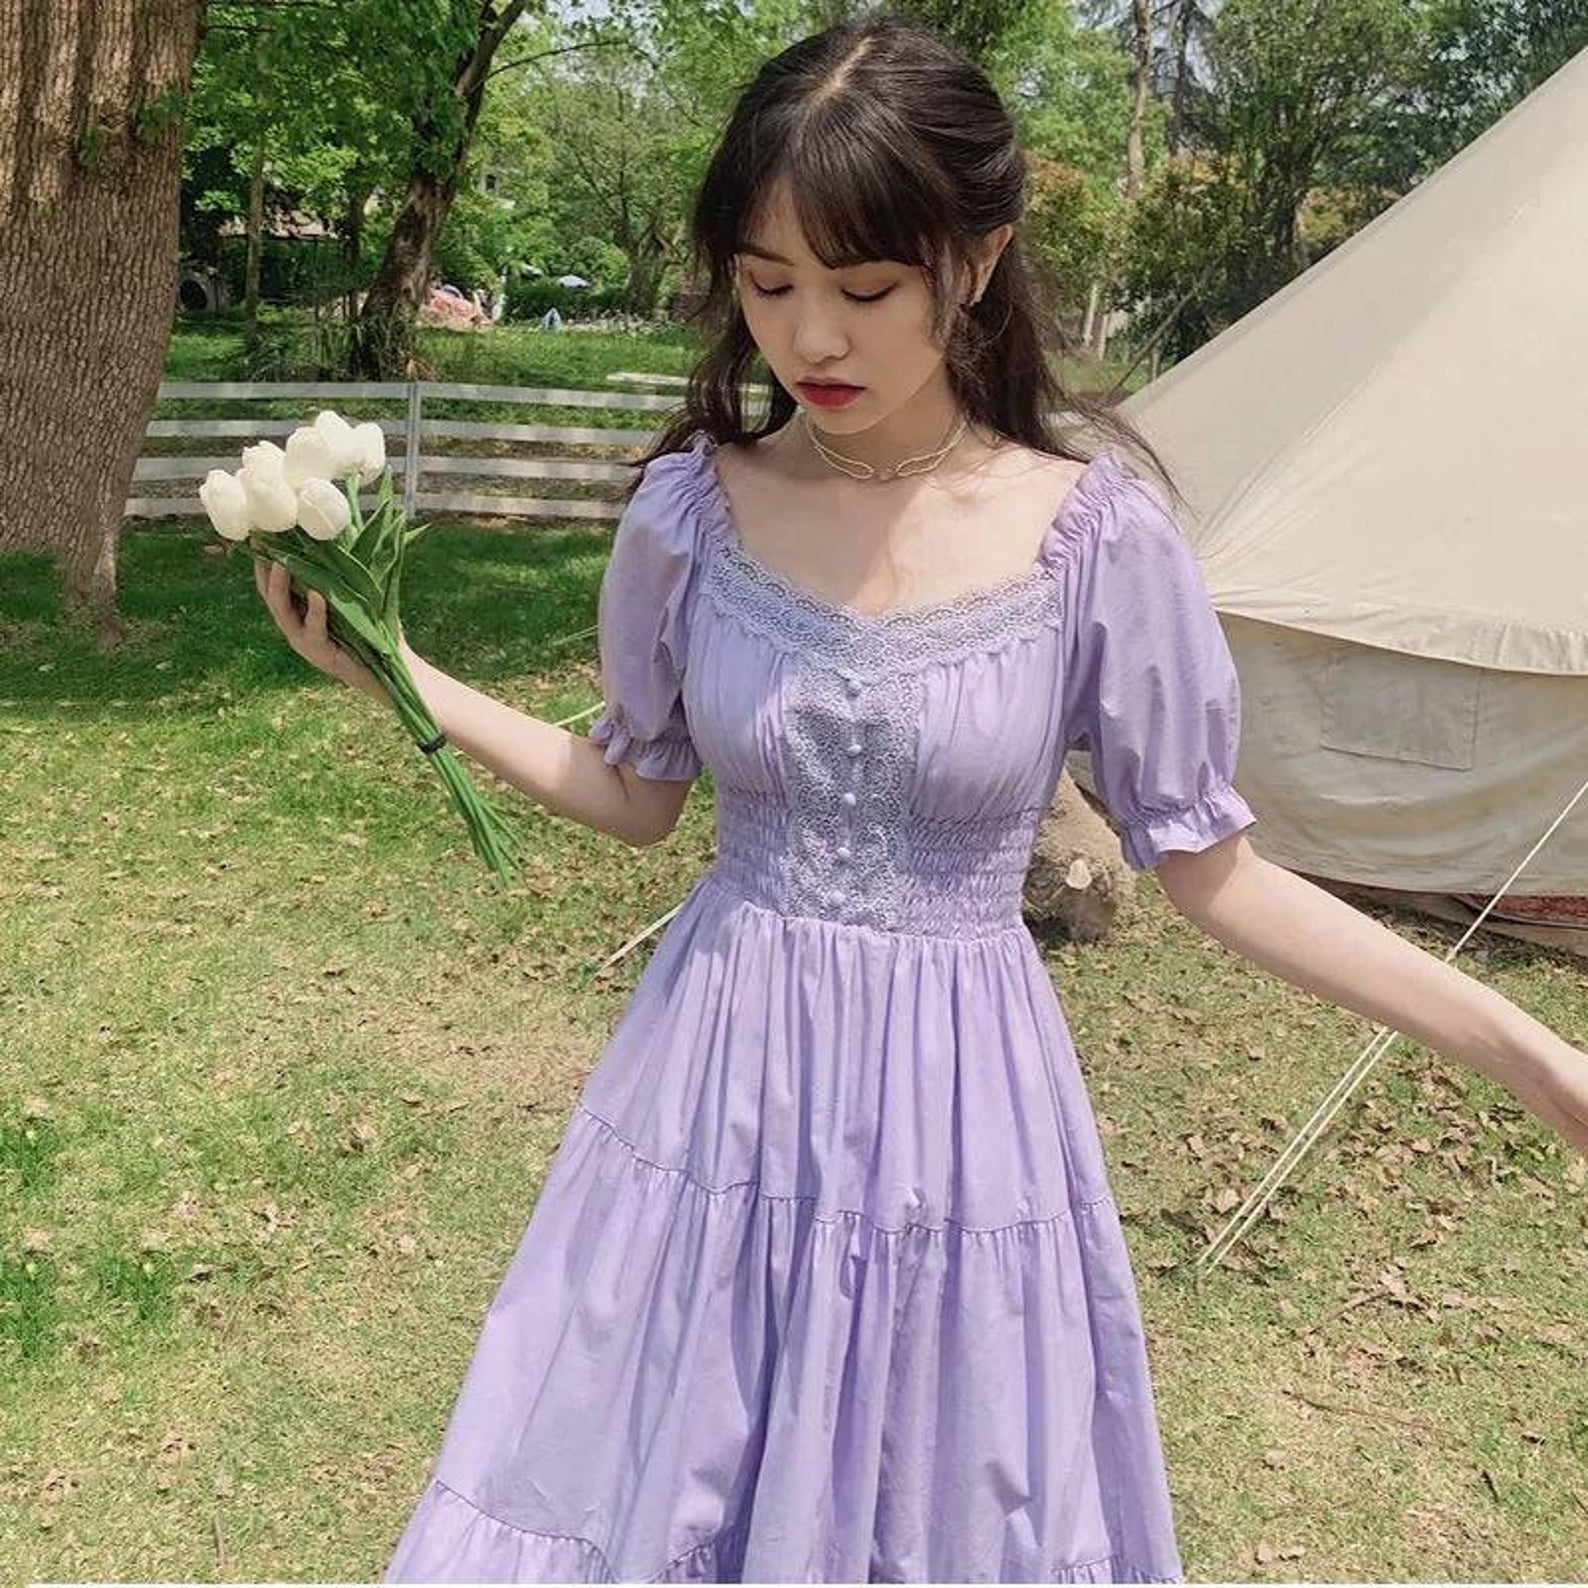 A woman on a farm holding flowers and wearing a pastel purple dress with puffy sleeves, lace, and a tiered skirt one of the best cottagecore dresses